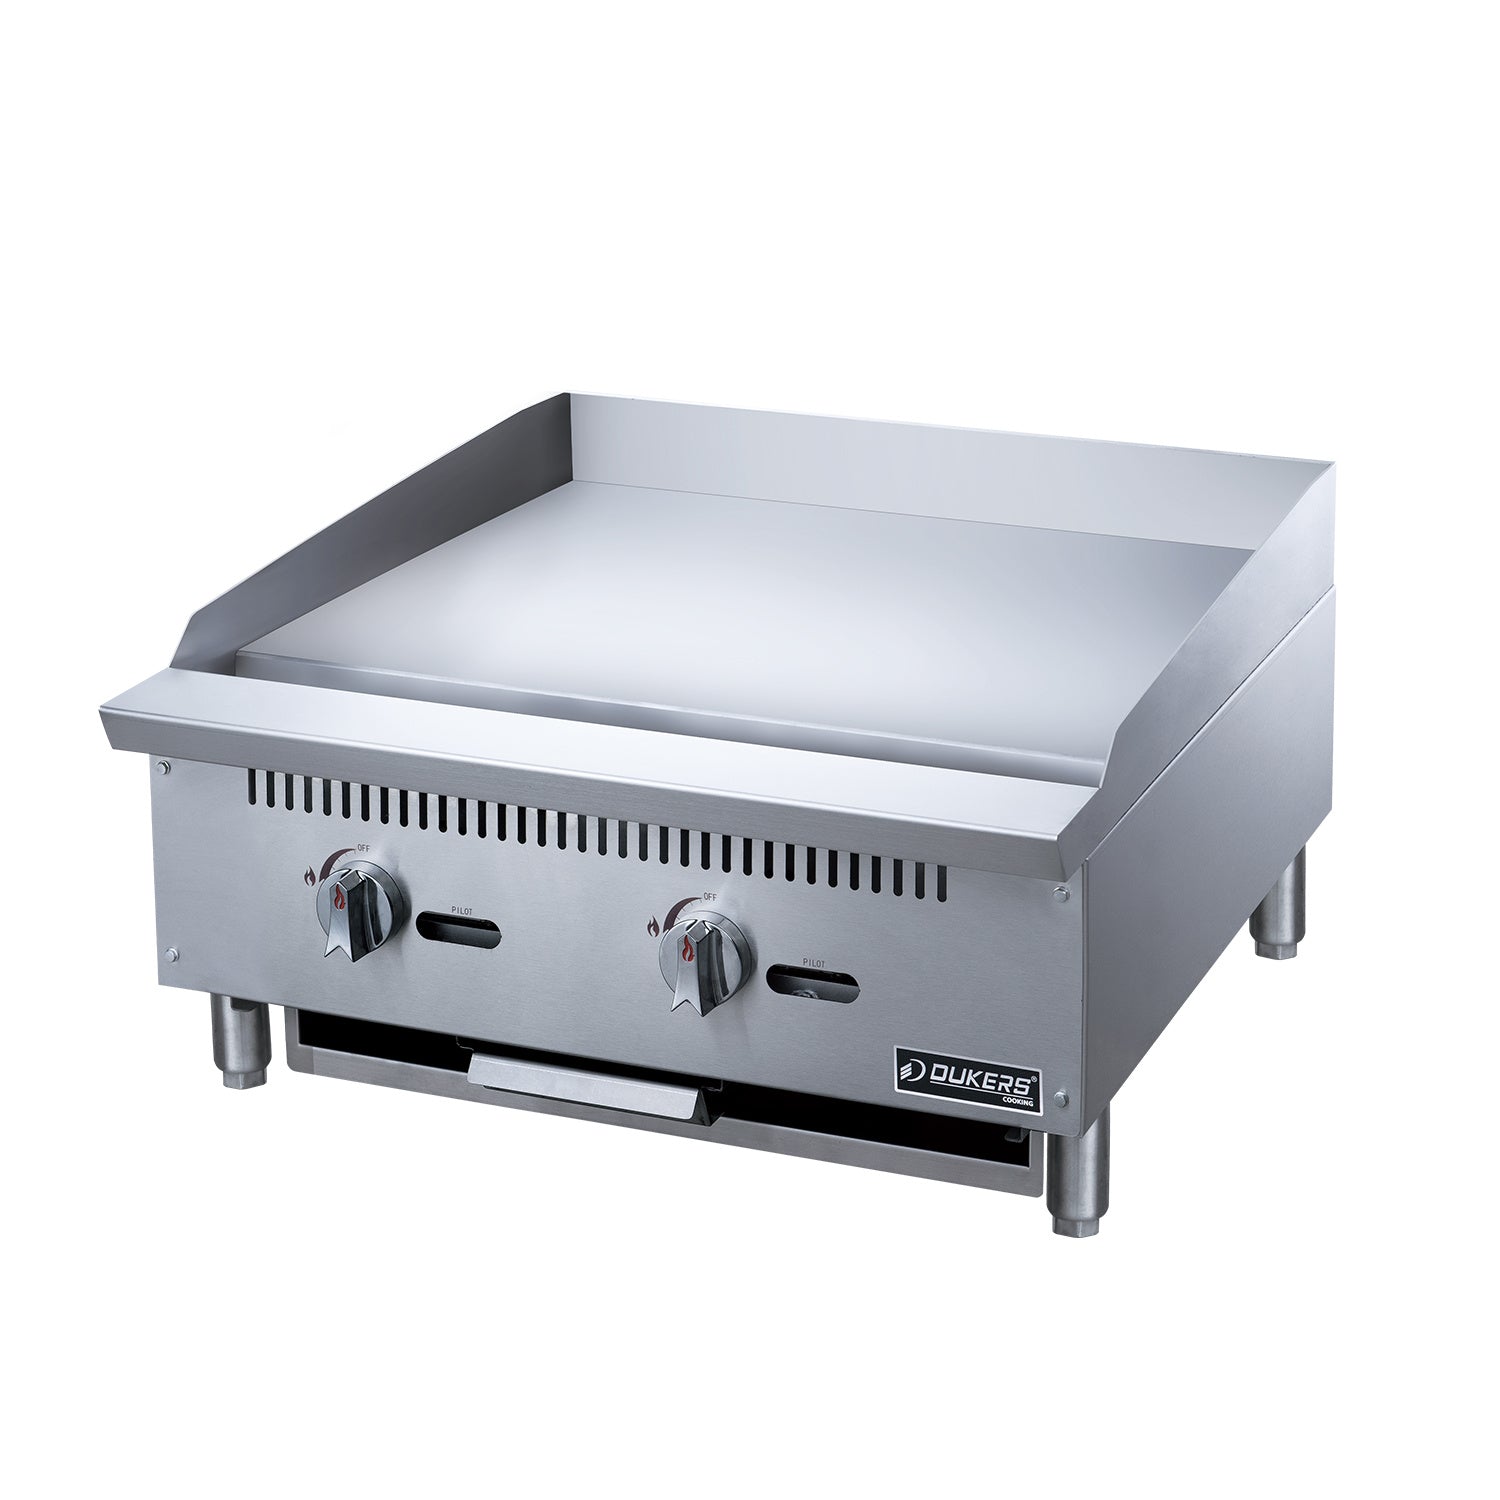 2-Burner Commercial Stainless Steel Griddle with 4 legs, isolated on a white background.